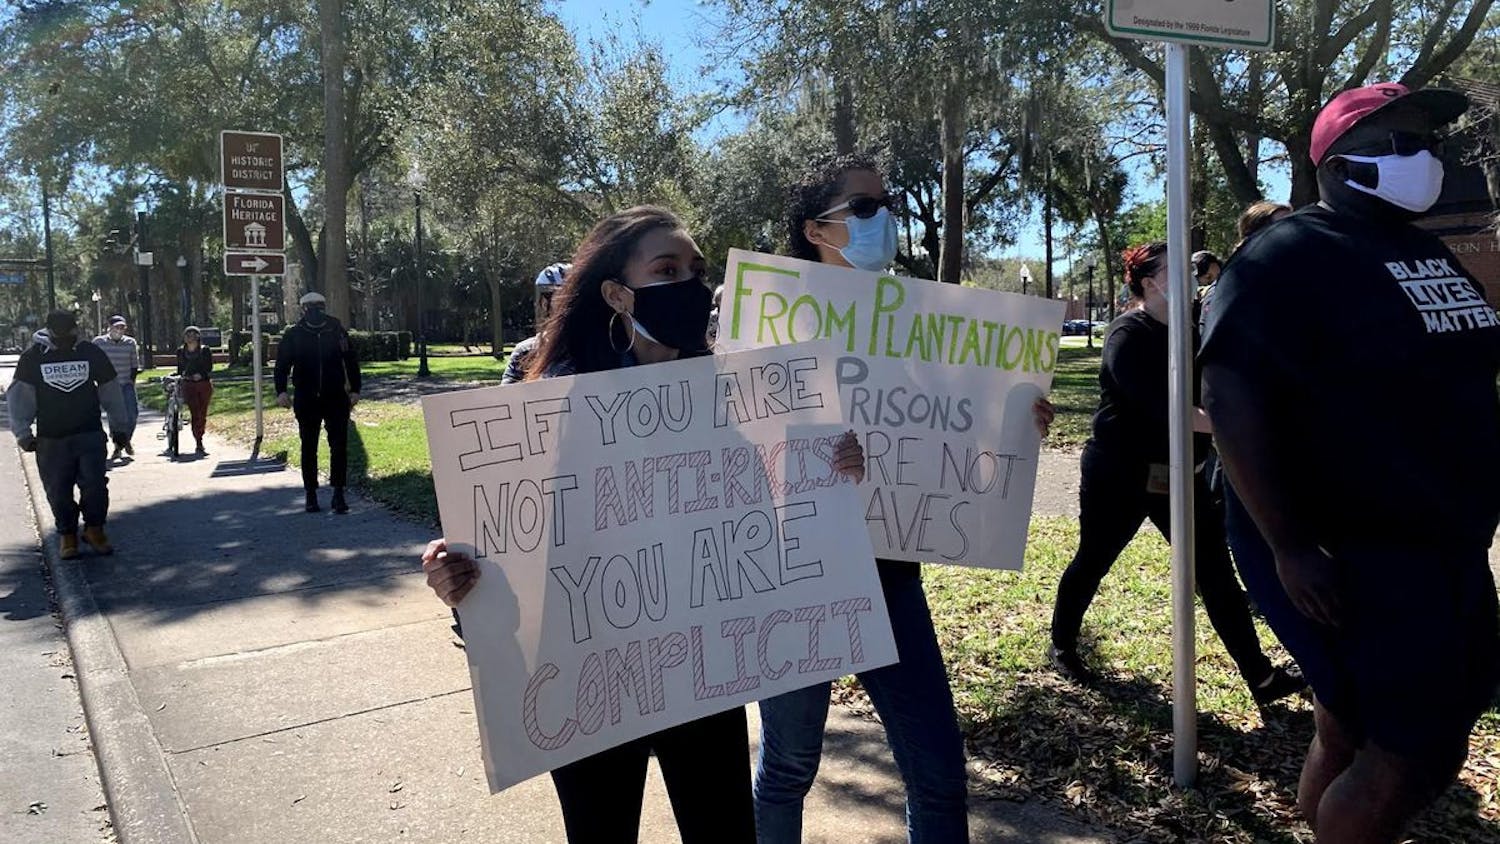 Brianna Alderman (Left) and Camile Hagins (Right) hold up homemade signs as they march in support of antiracism on Feb. 20, 2021.